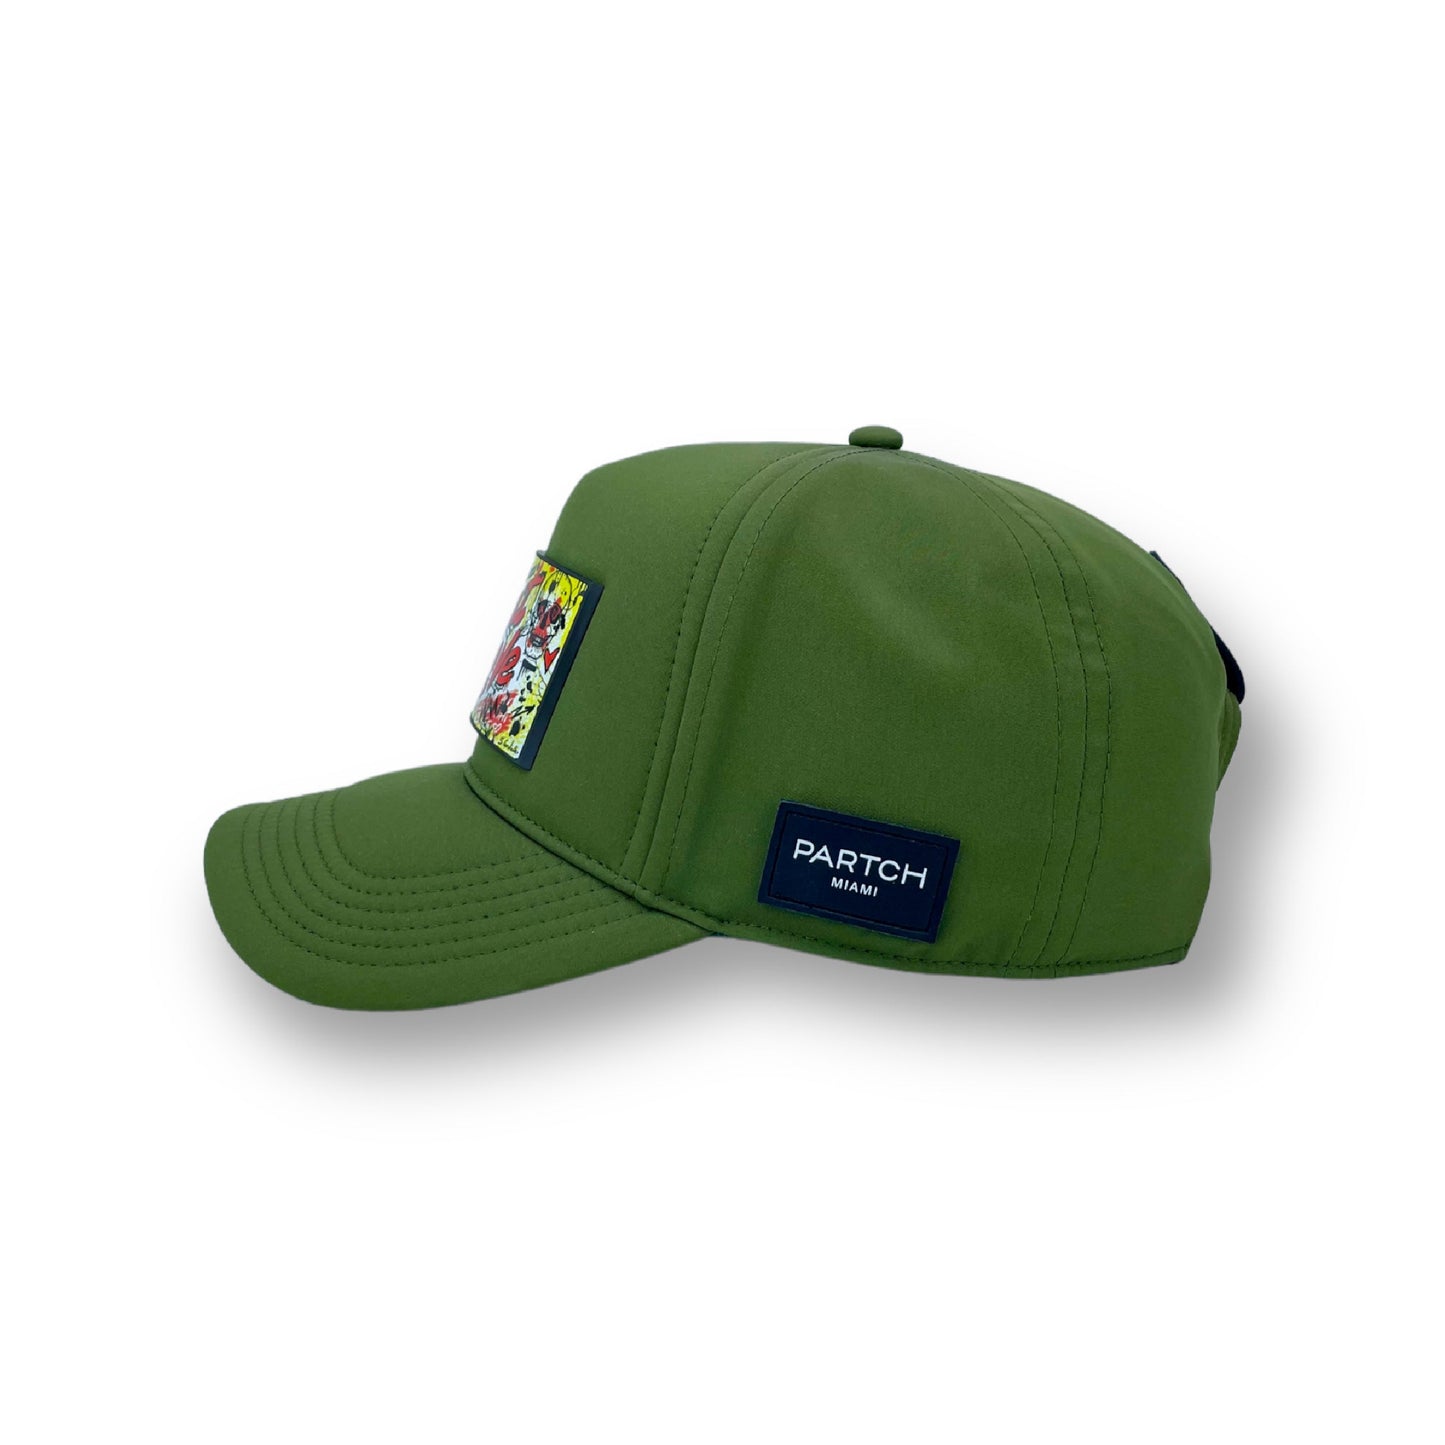 PARTCH premium trucker hat in green with Art patch removable in a second